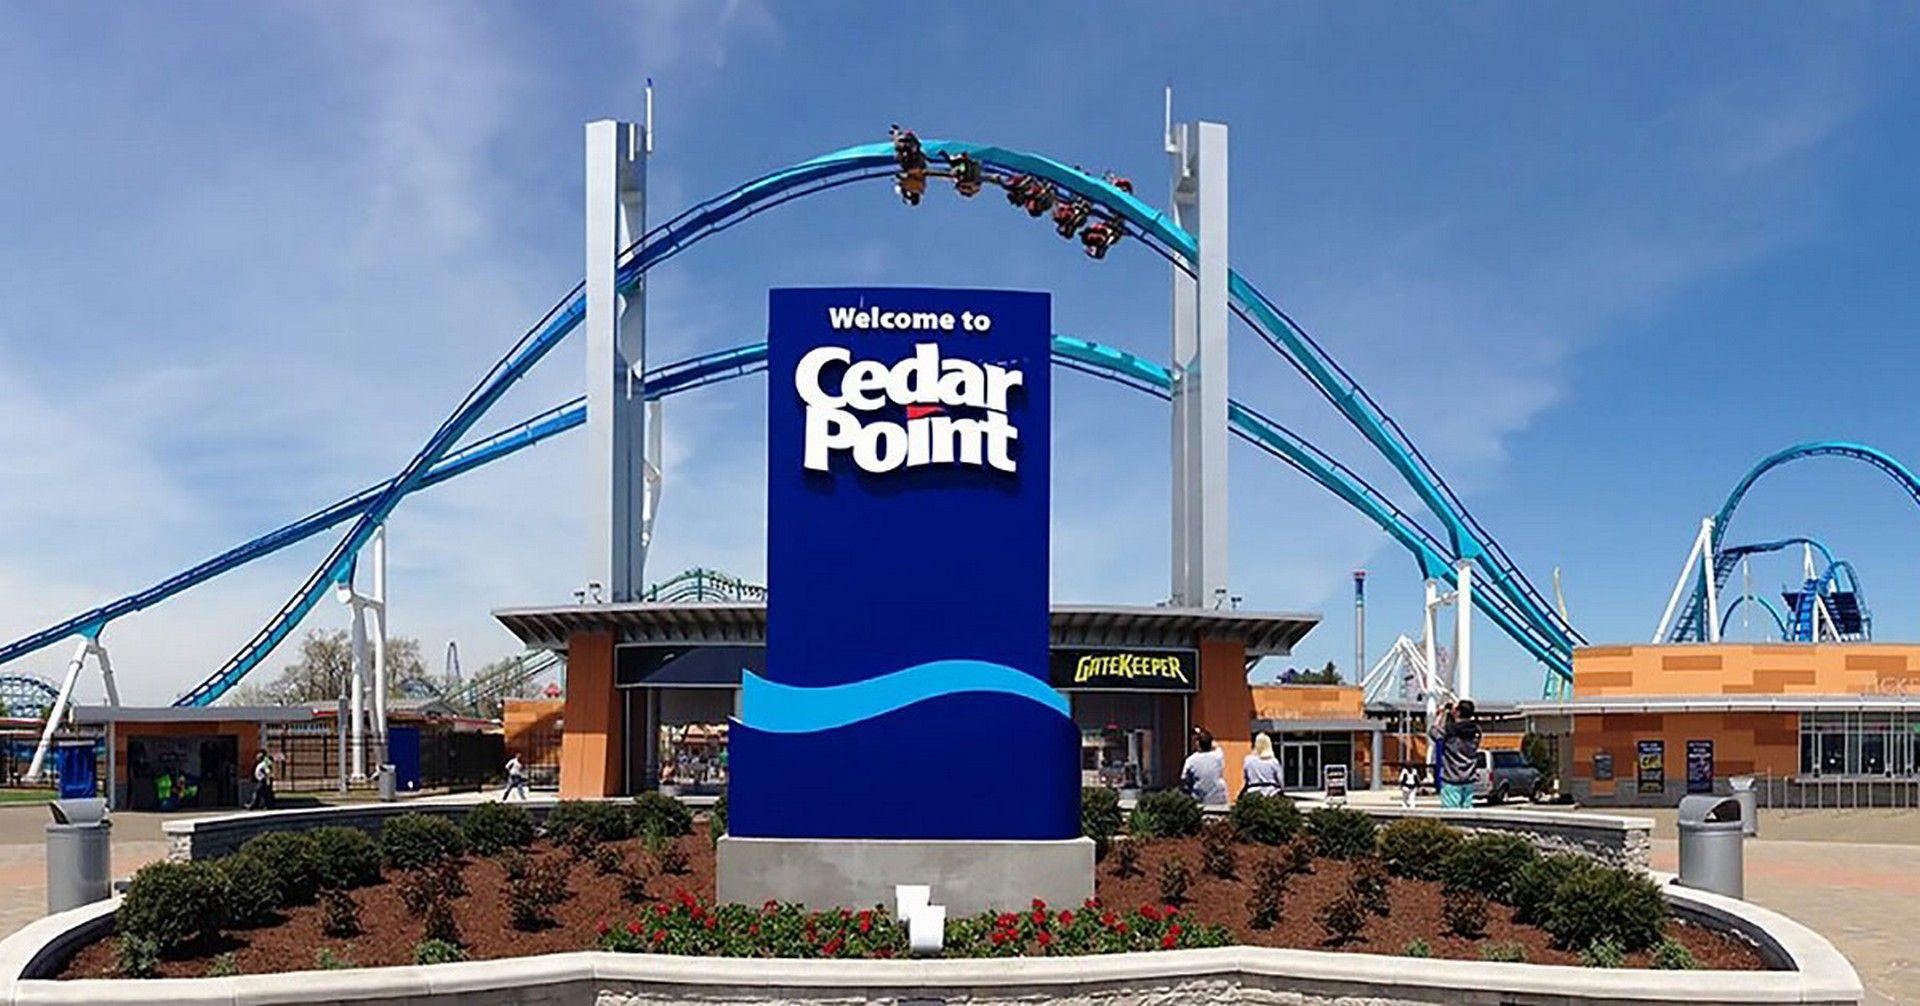 A coaster connoisseur finds middle ground at Cedar Point